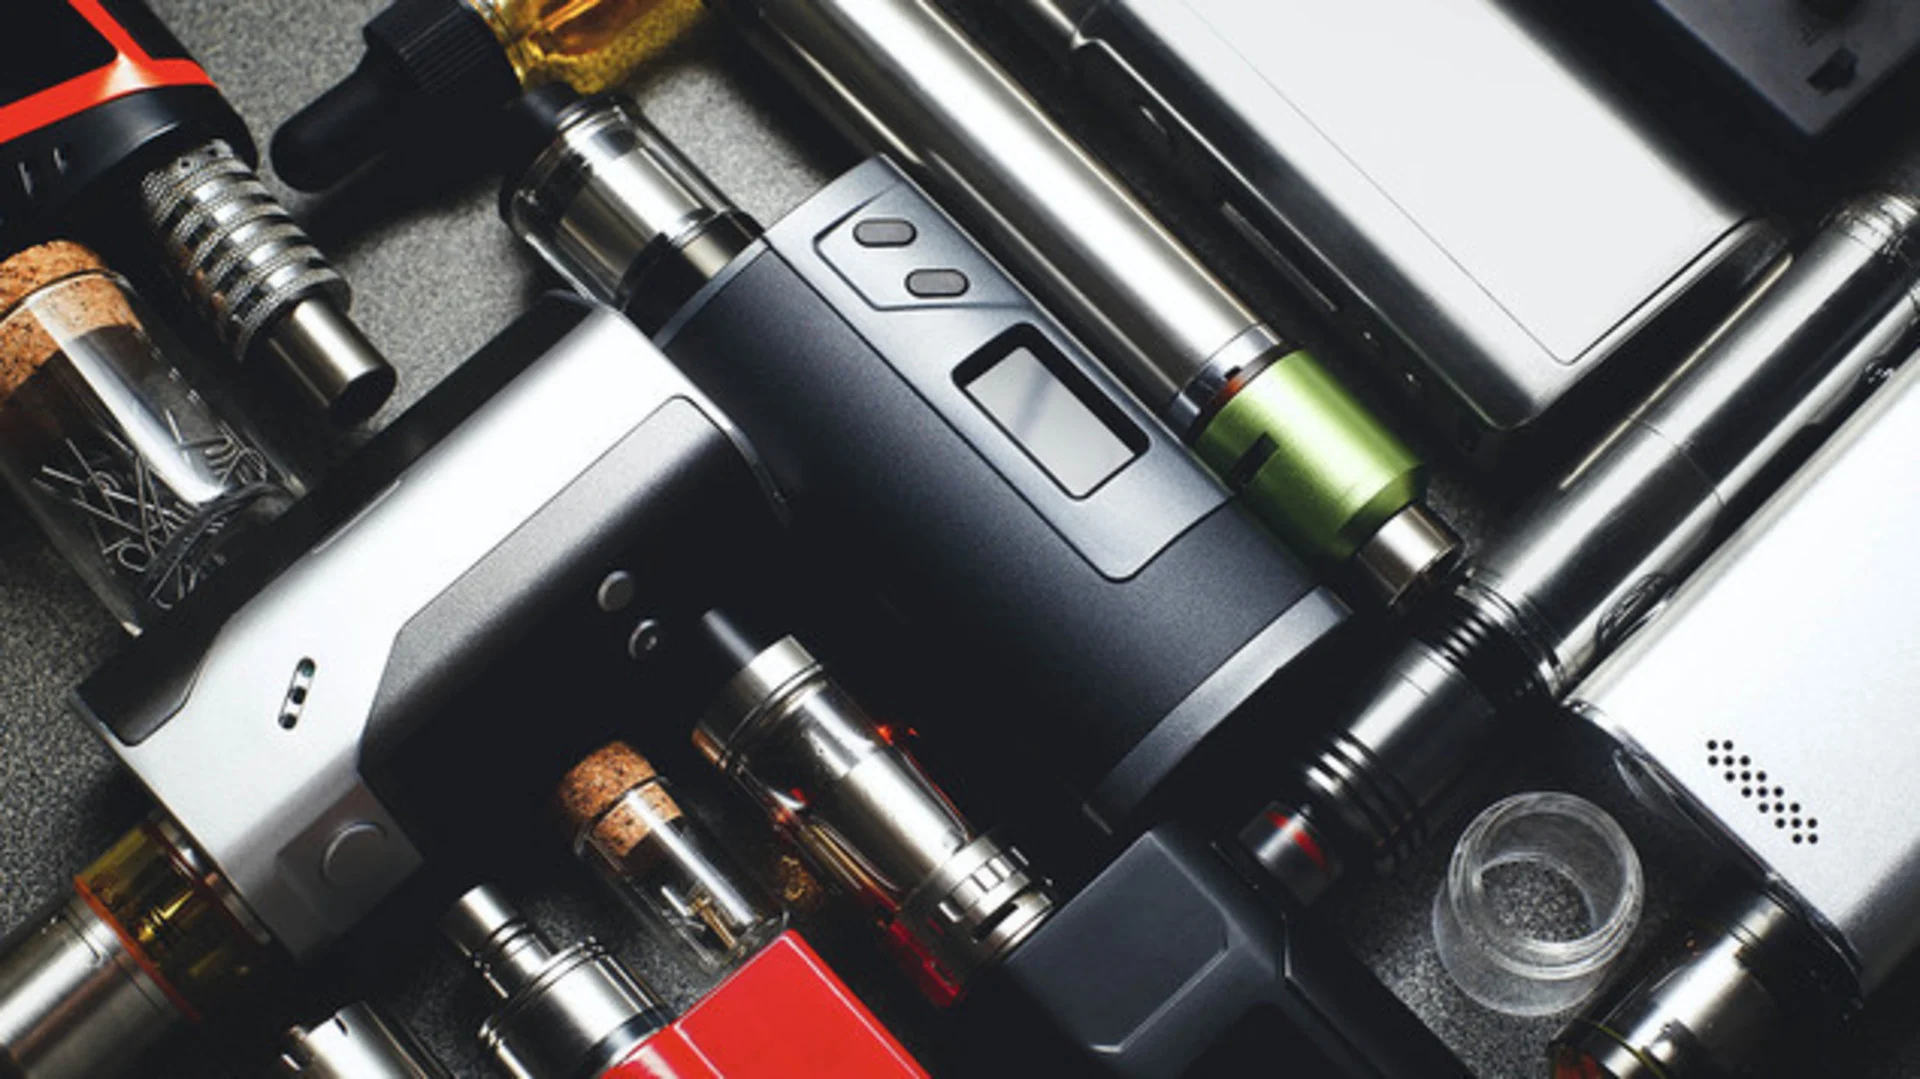 How to Choose an Online Vape Shop in Burnaby